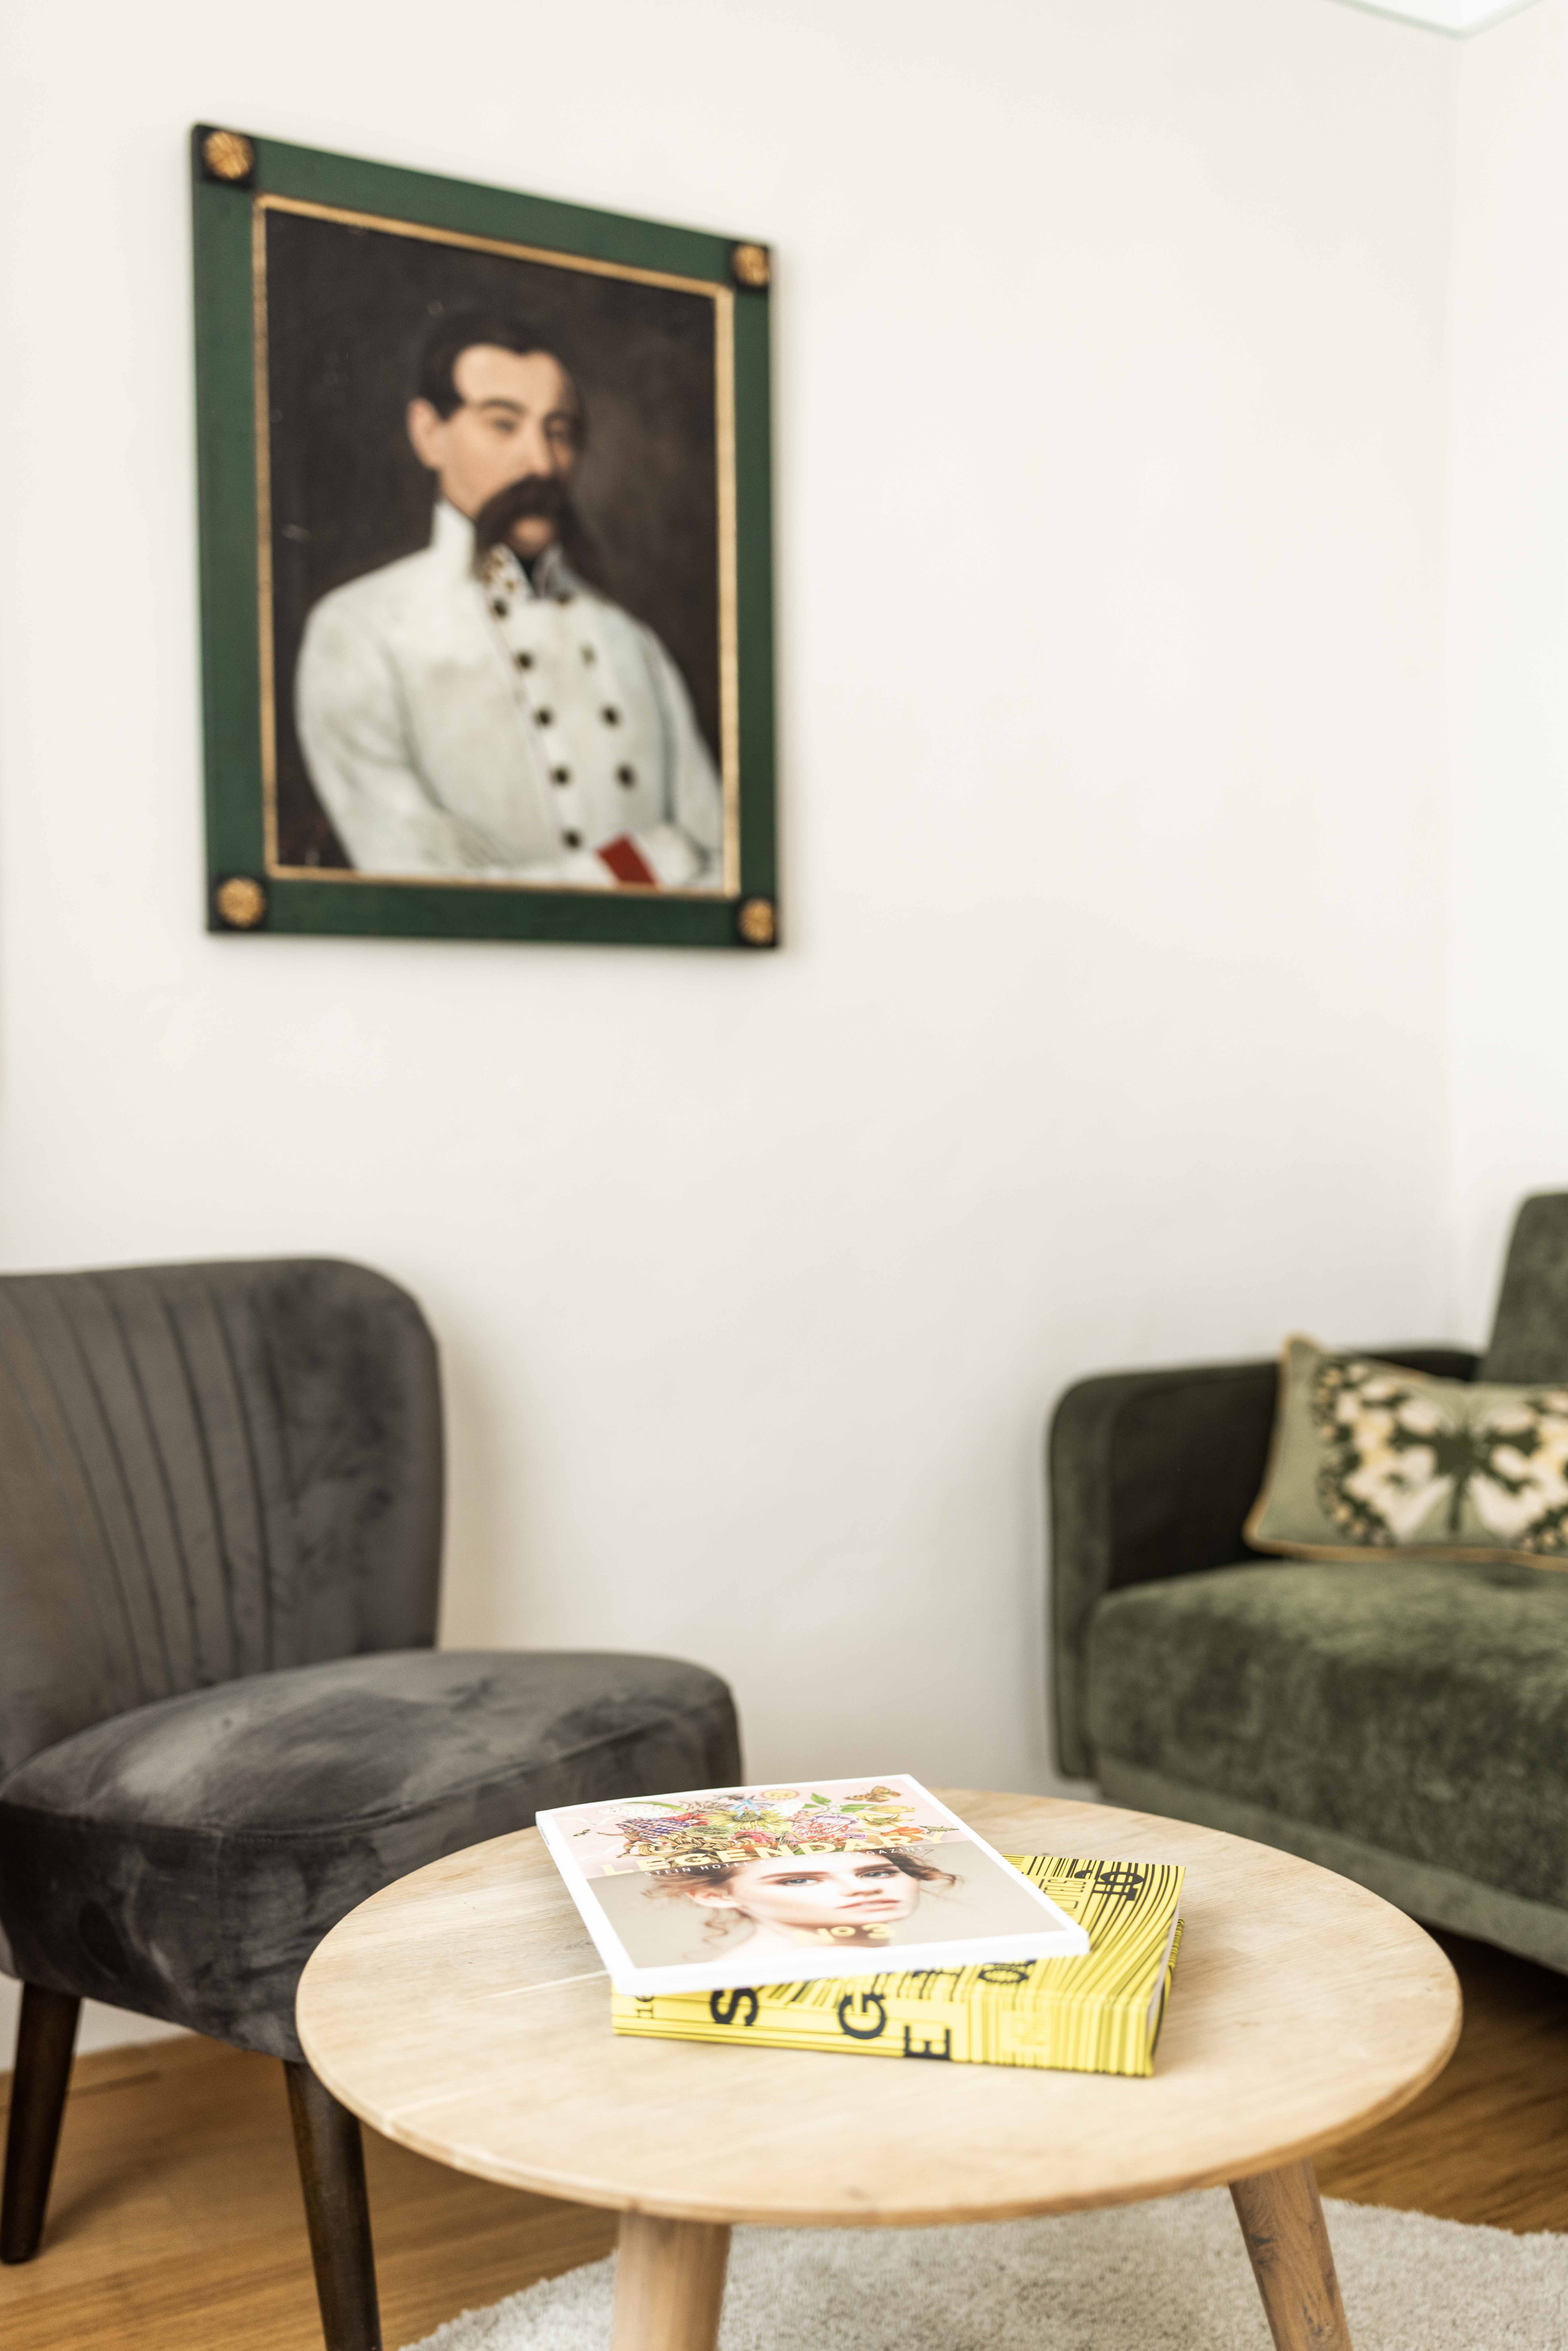 Reading corner with elegant vintage style furniture and a portrait of an officer on the wall